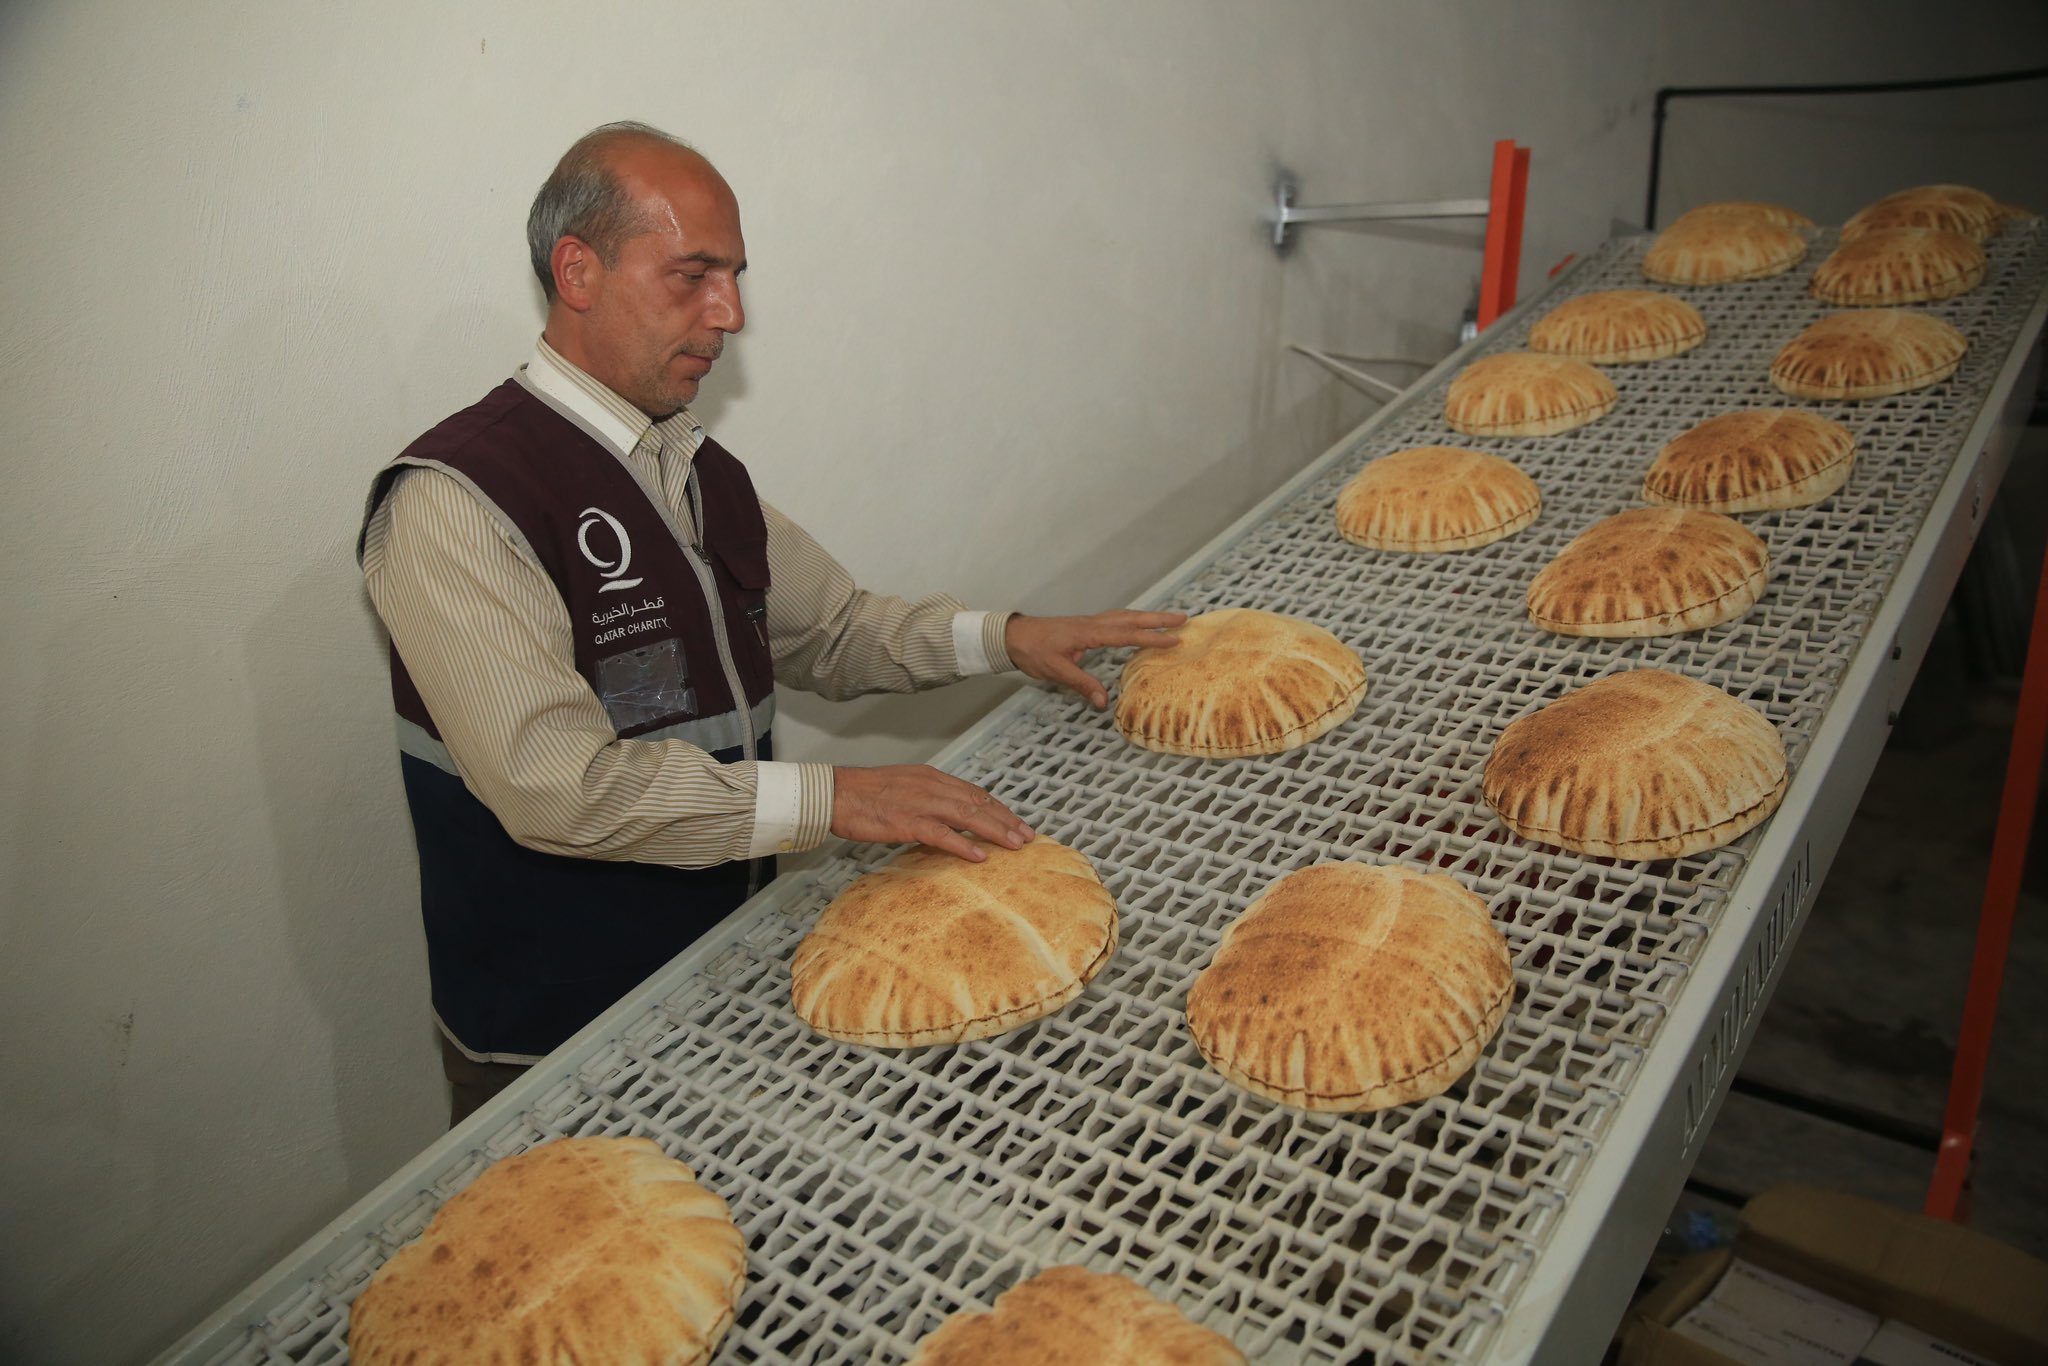 Qatar Charity bolsters food security in northern Syria with automated bread line